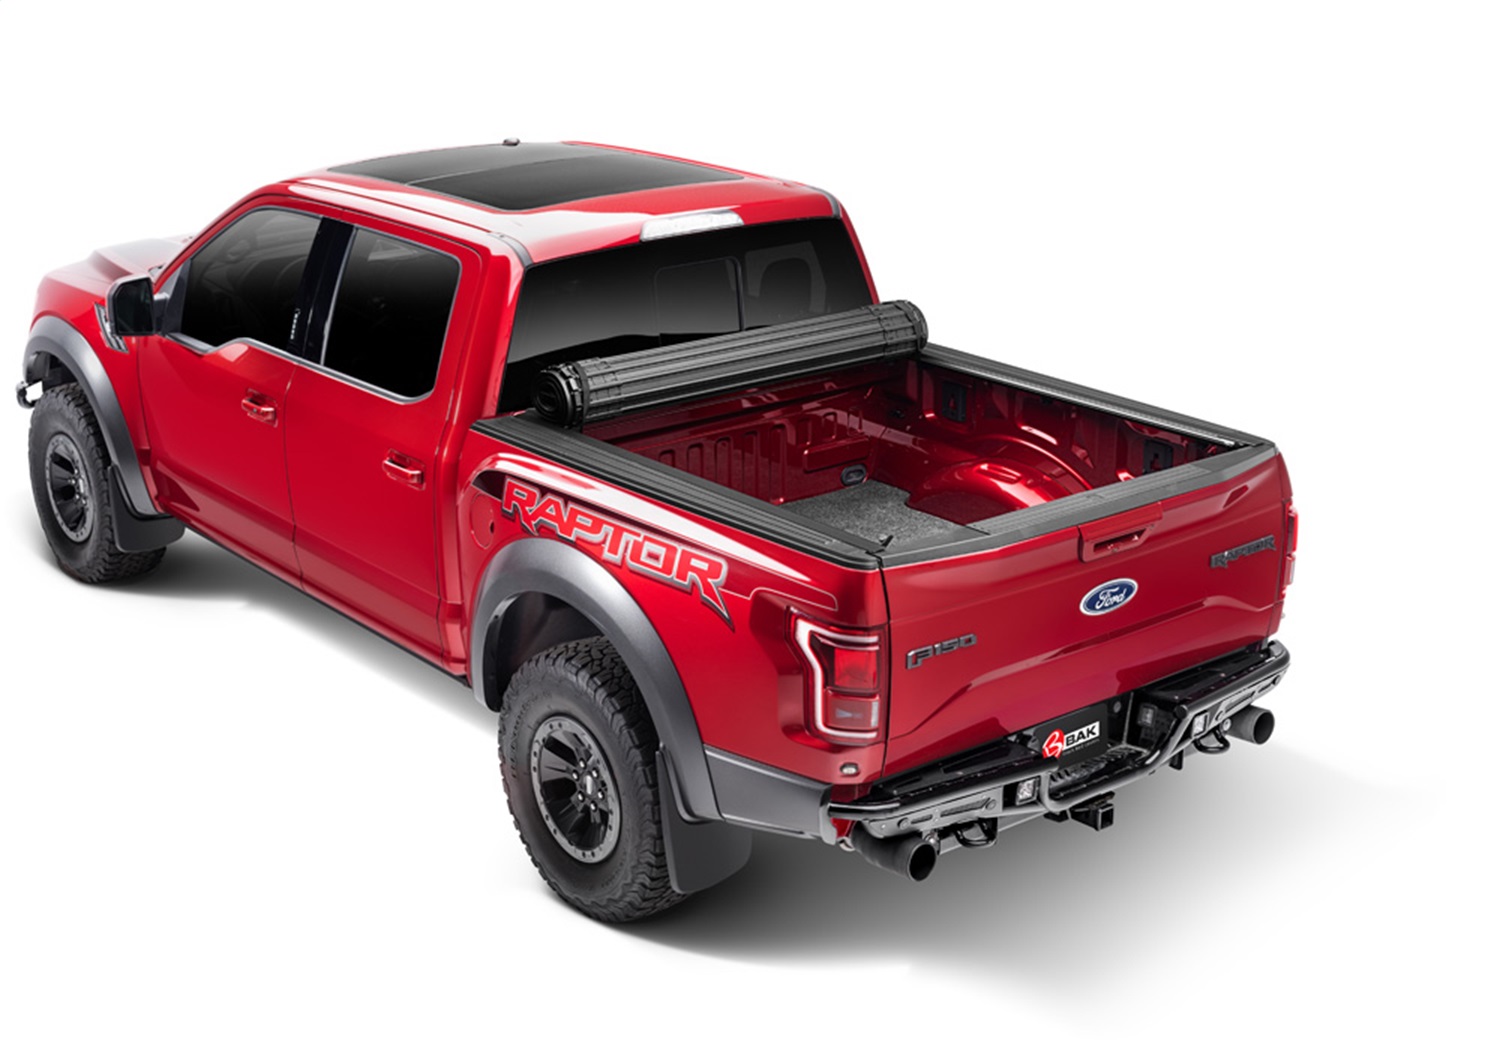 BAK Industries 80309 Revolver X4s Hard Rolling Truck Bed Cover Fits 04-14 F-150